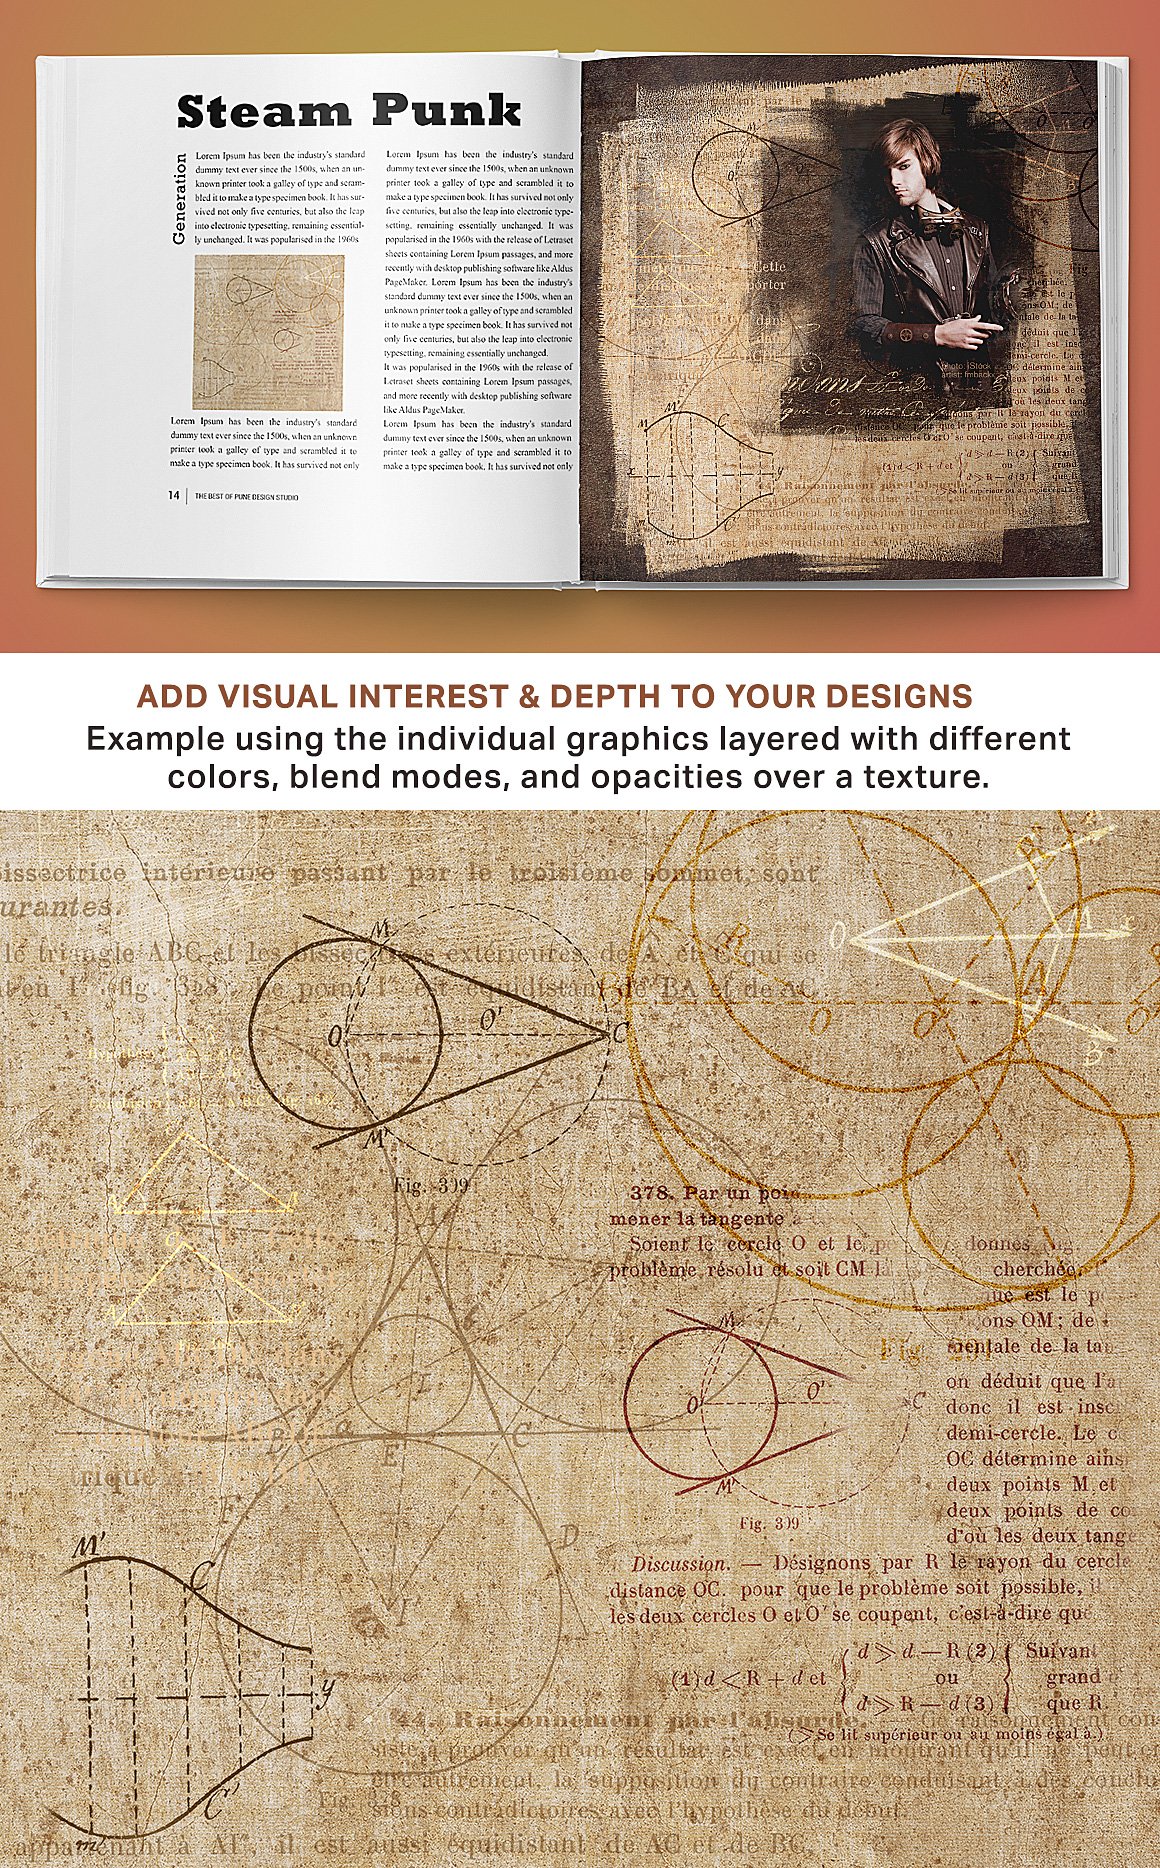 1912 French Geometrie Papers, Overlays & Graphics